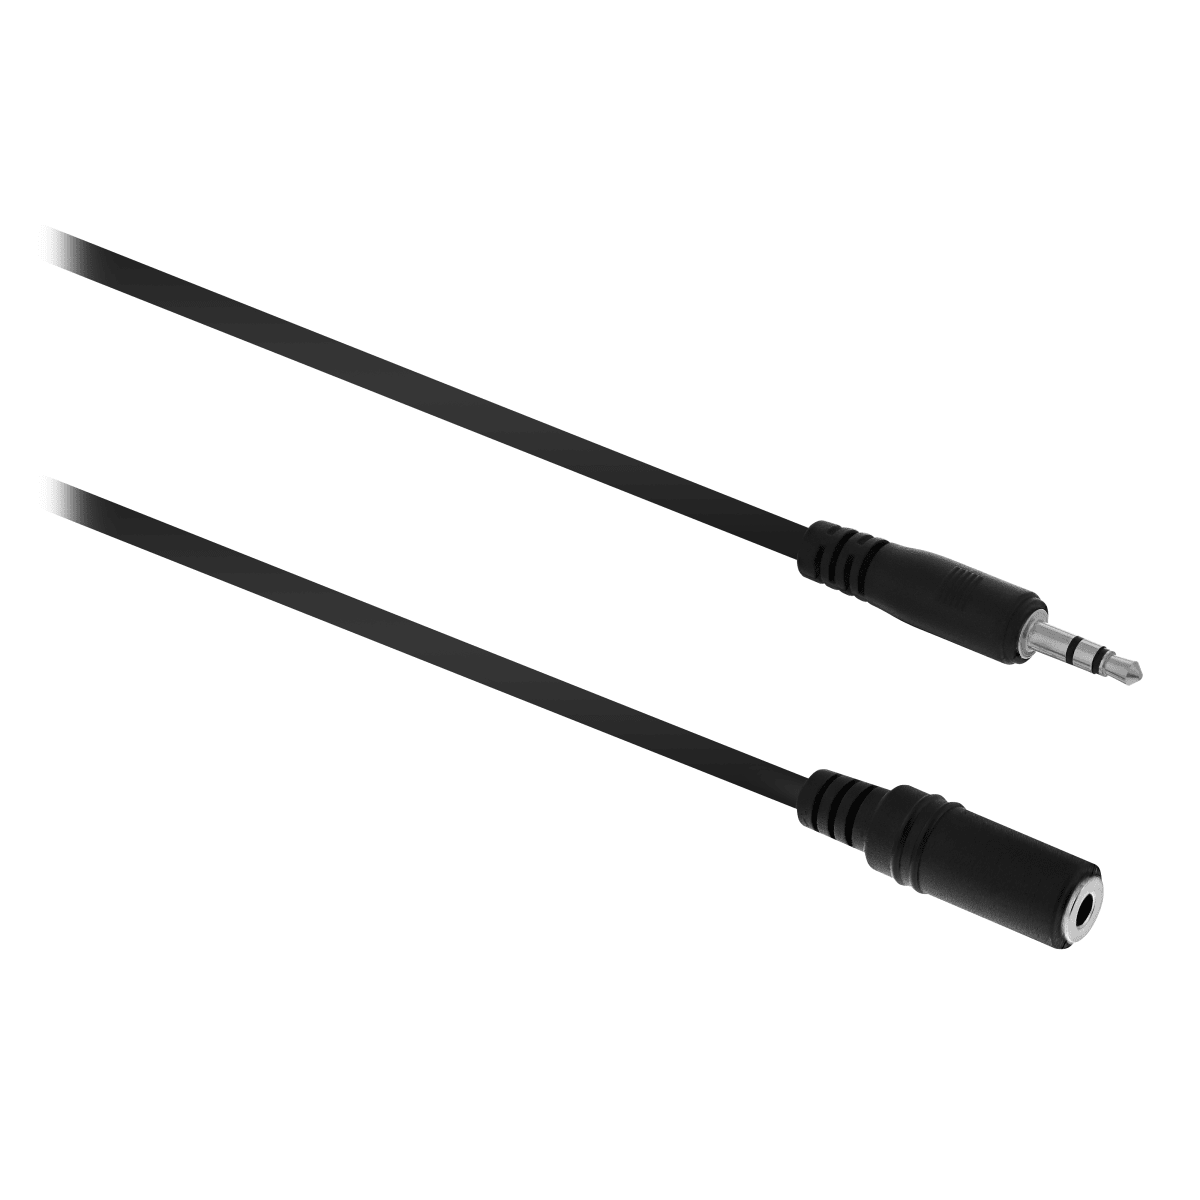 Jack 3.5mm male / jack 3.5mm female extension cable 5m